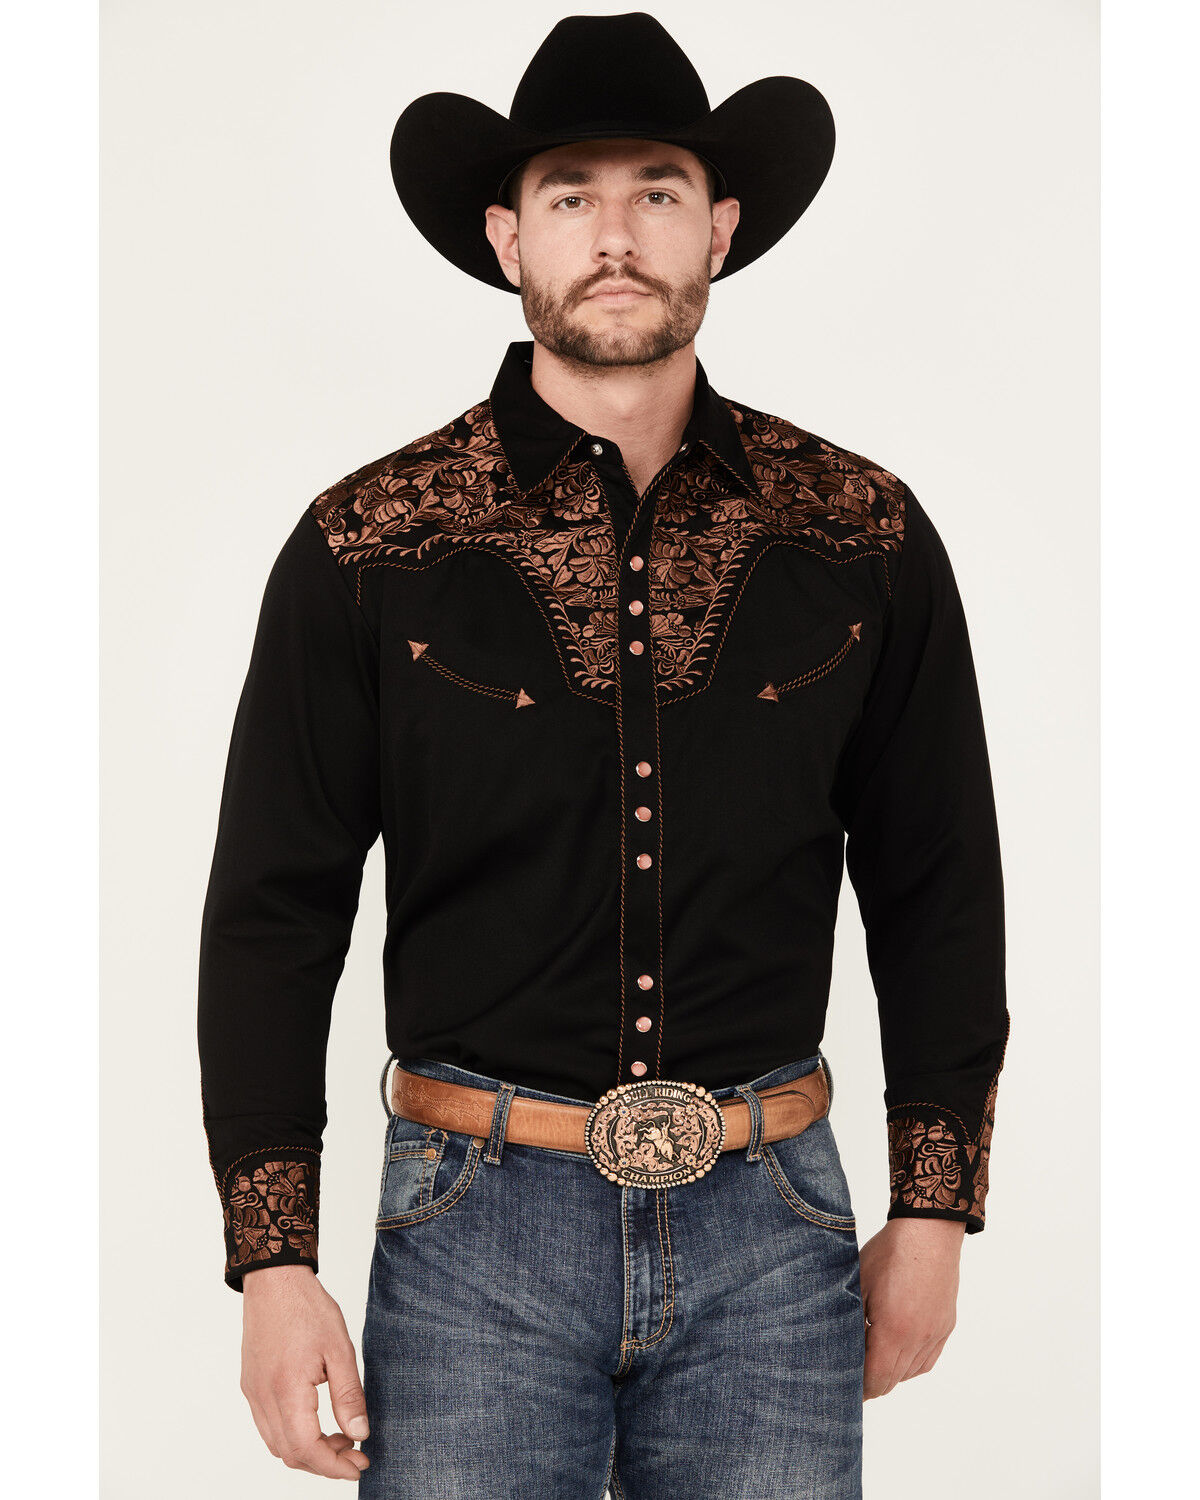 heymoney Mens Western Cowboy Embroidered Long Sleeve Button Down Shirt Tops Blouses